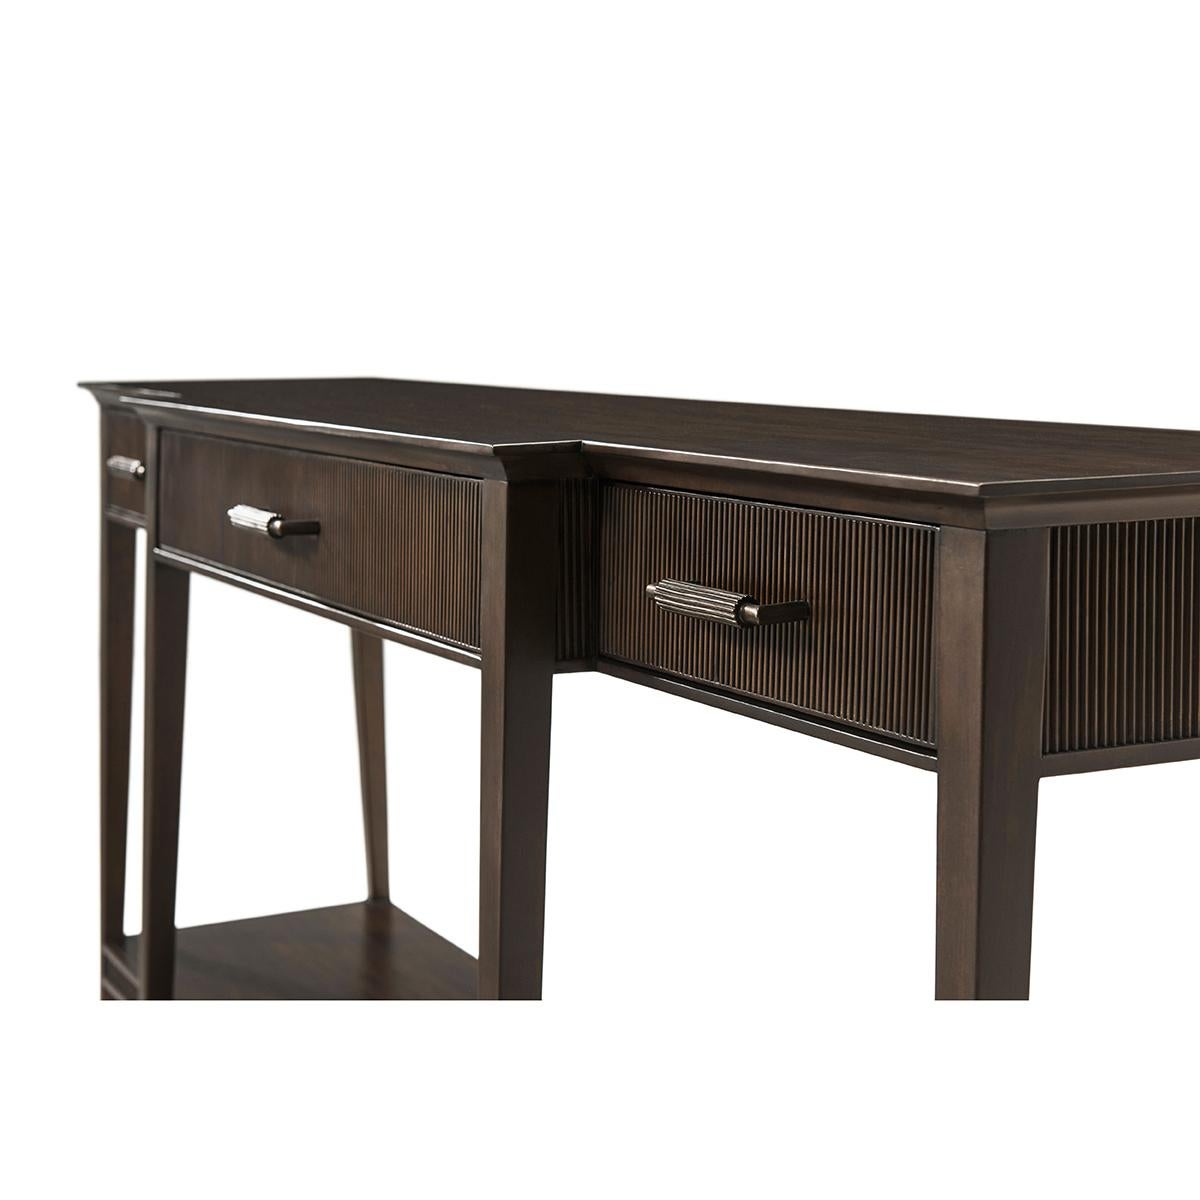 Vietnamese Modern French Console For Sale